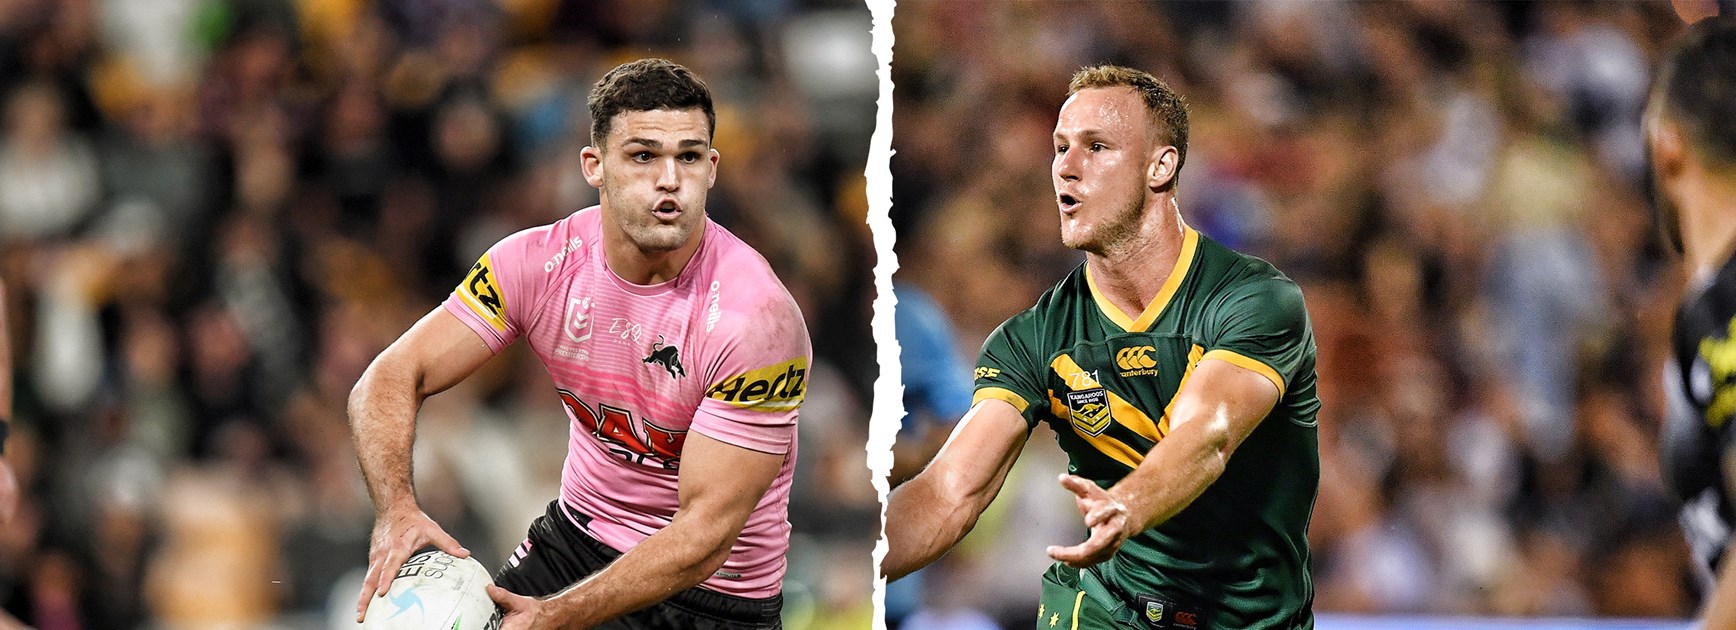 For & Against: Has Cleary overtaken DCE for Roos No.7